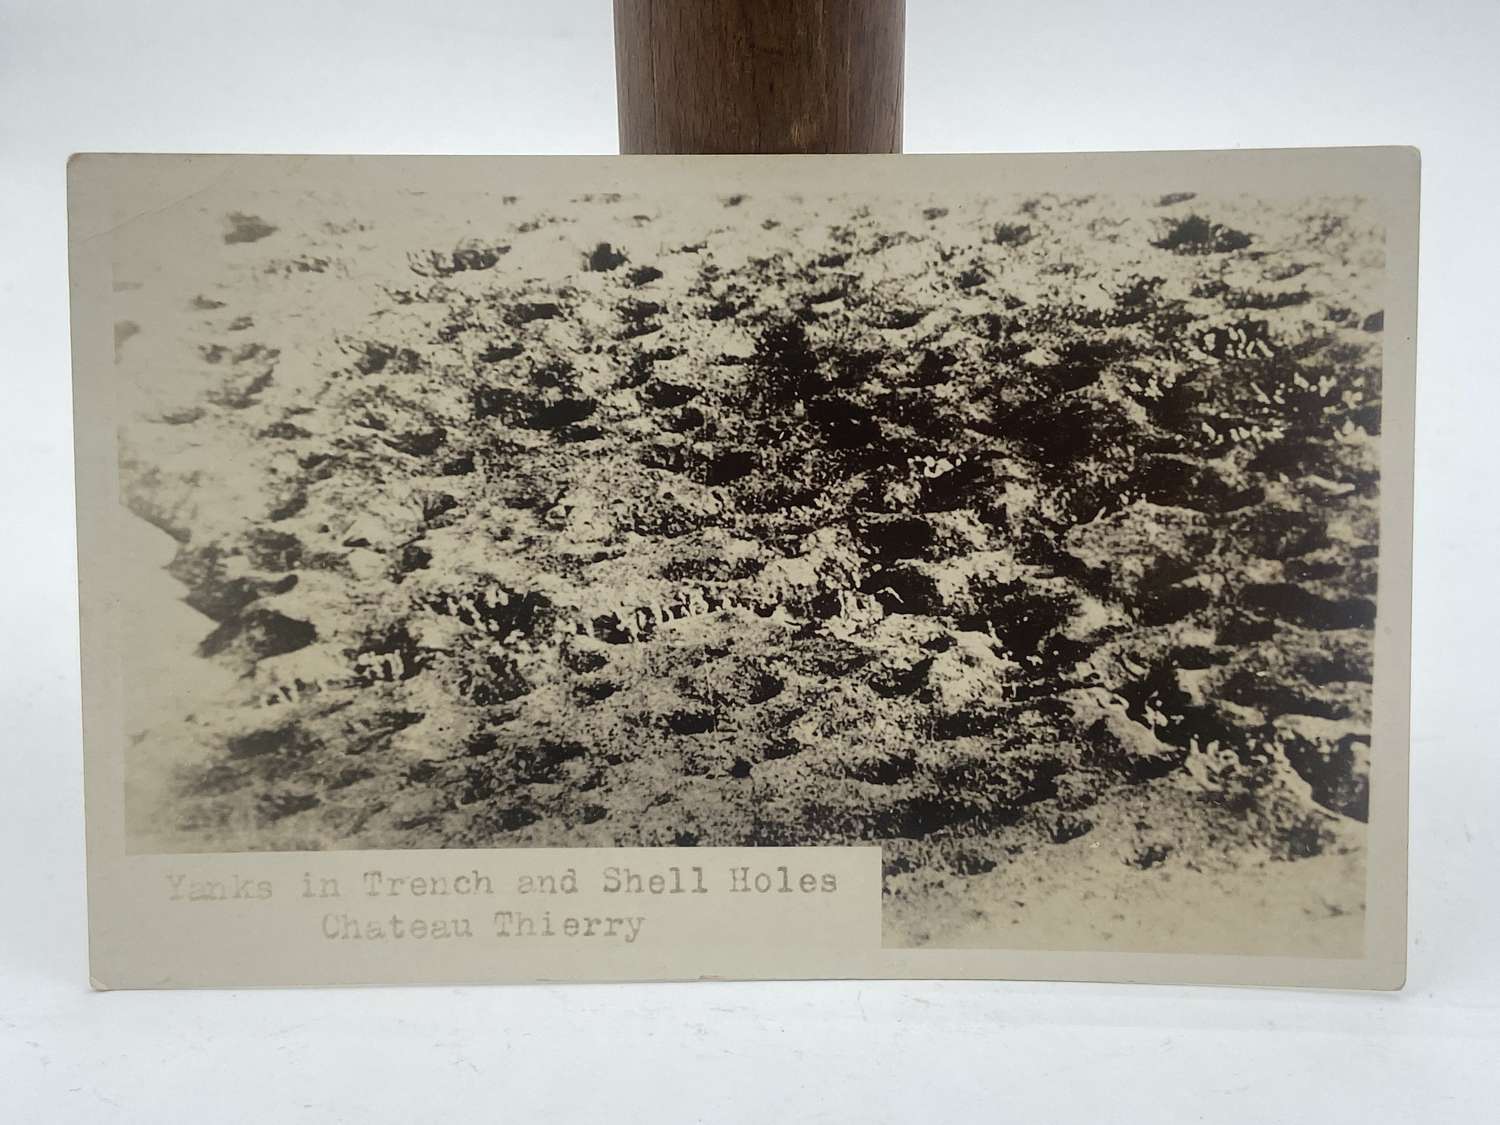 WW1 Yanks In Trench & Shell Holes Chateau Thierry Photo Postcard